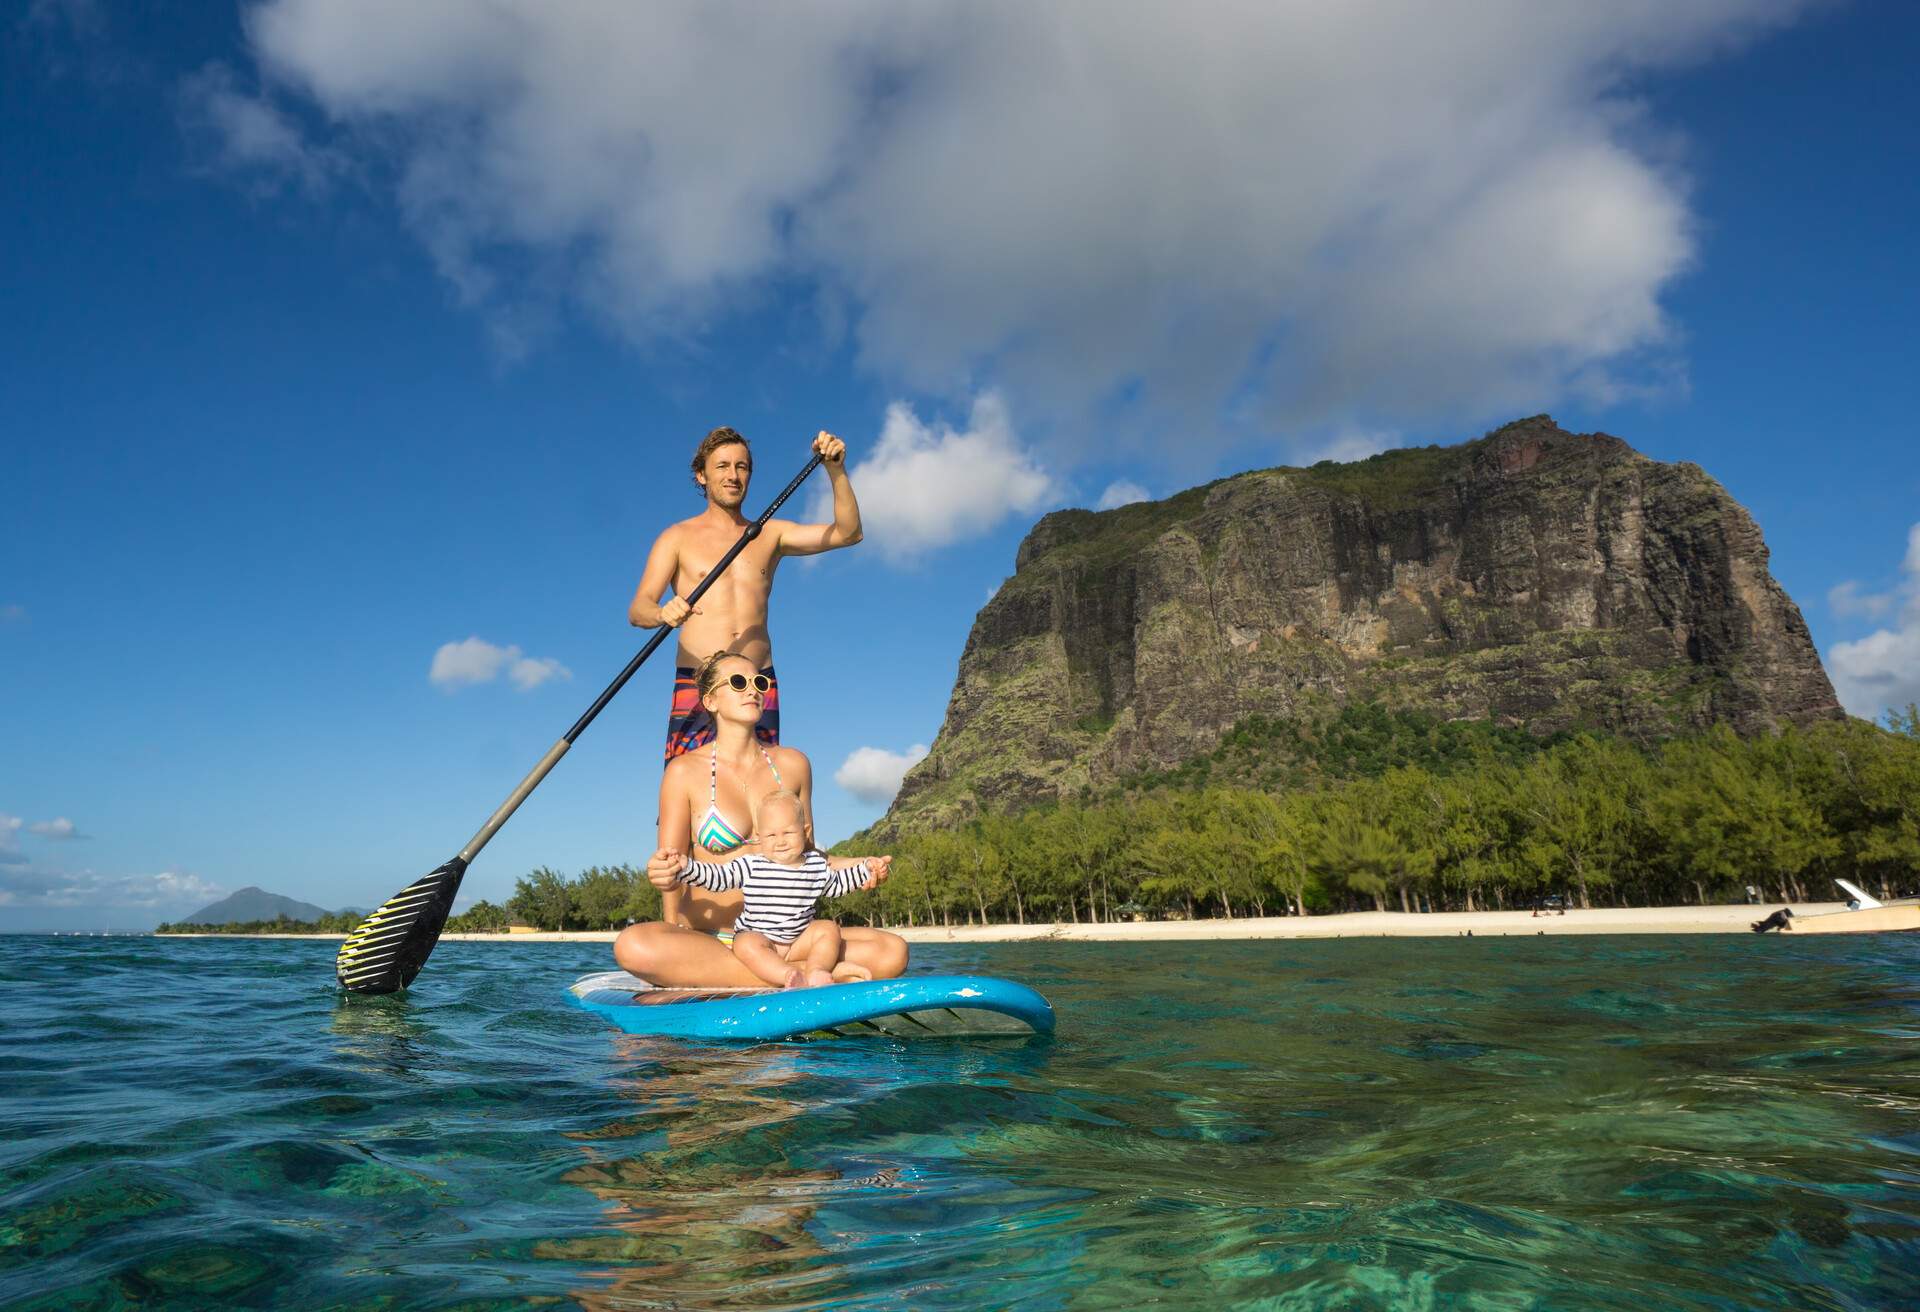 DEST_MAURITIUS_PADDLEBOARD_GETTYIMAGES_507837892